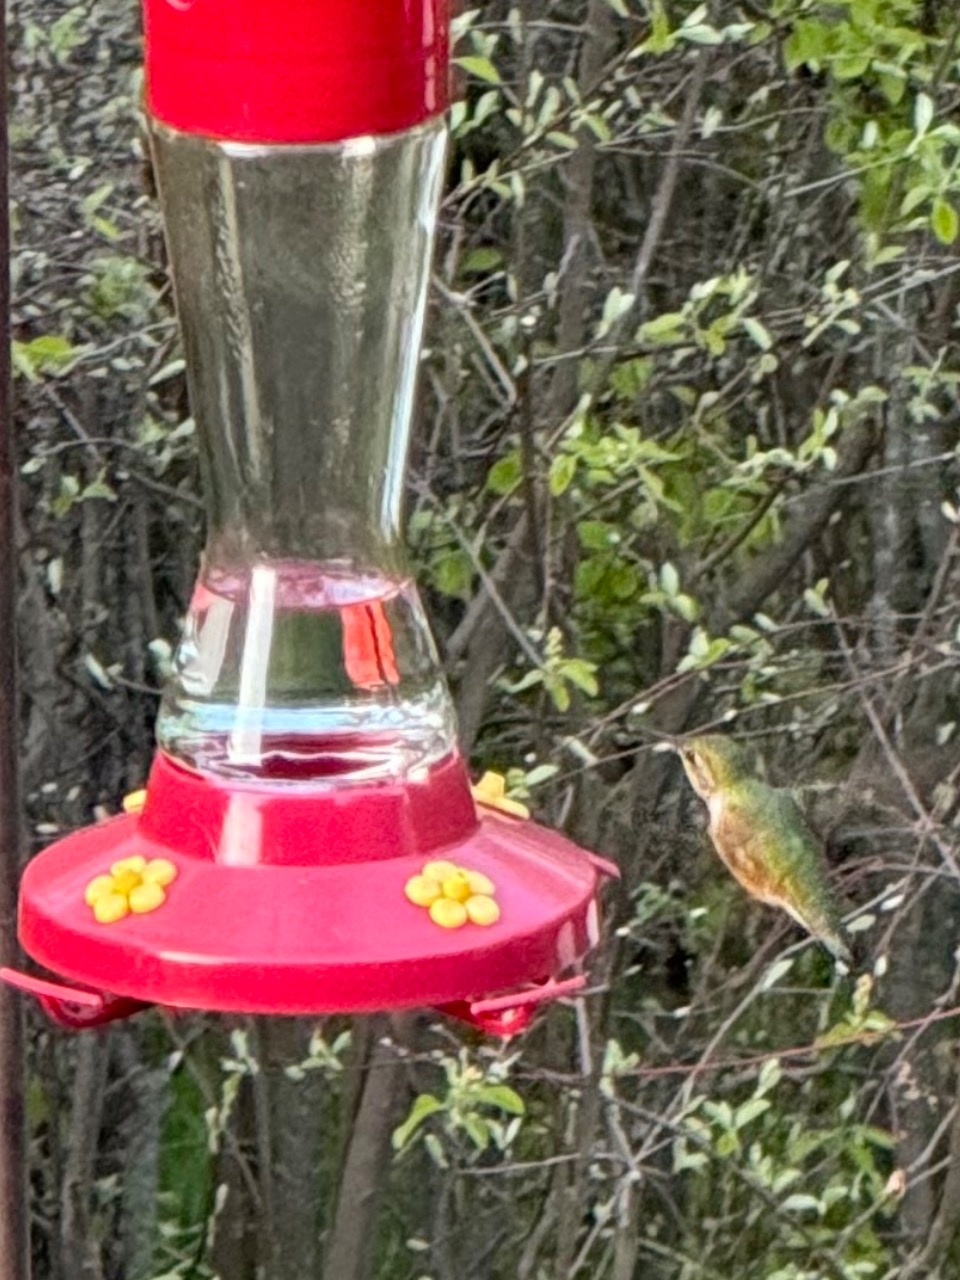 A female rufous hummingbird in a vertical photo visiting a red and yellow feeder with clear liquid